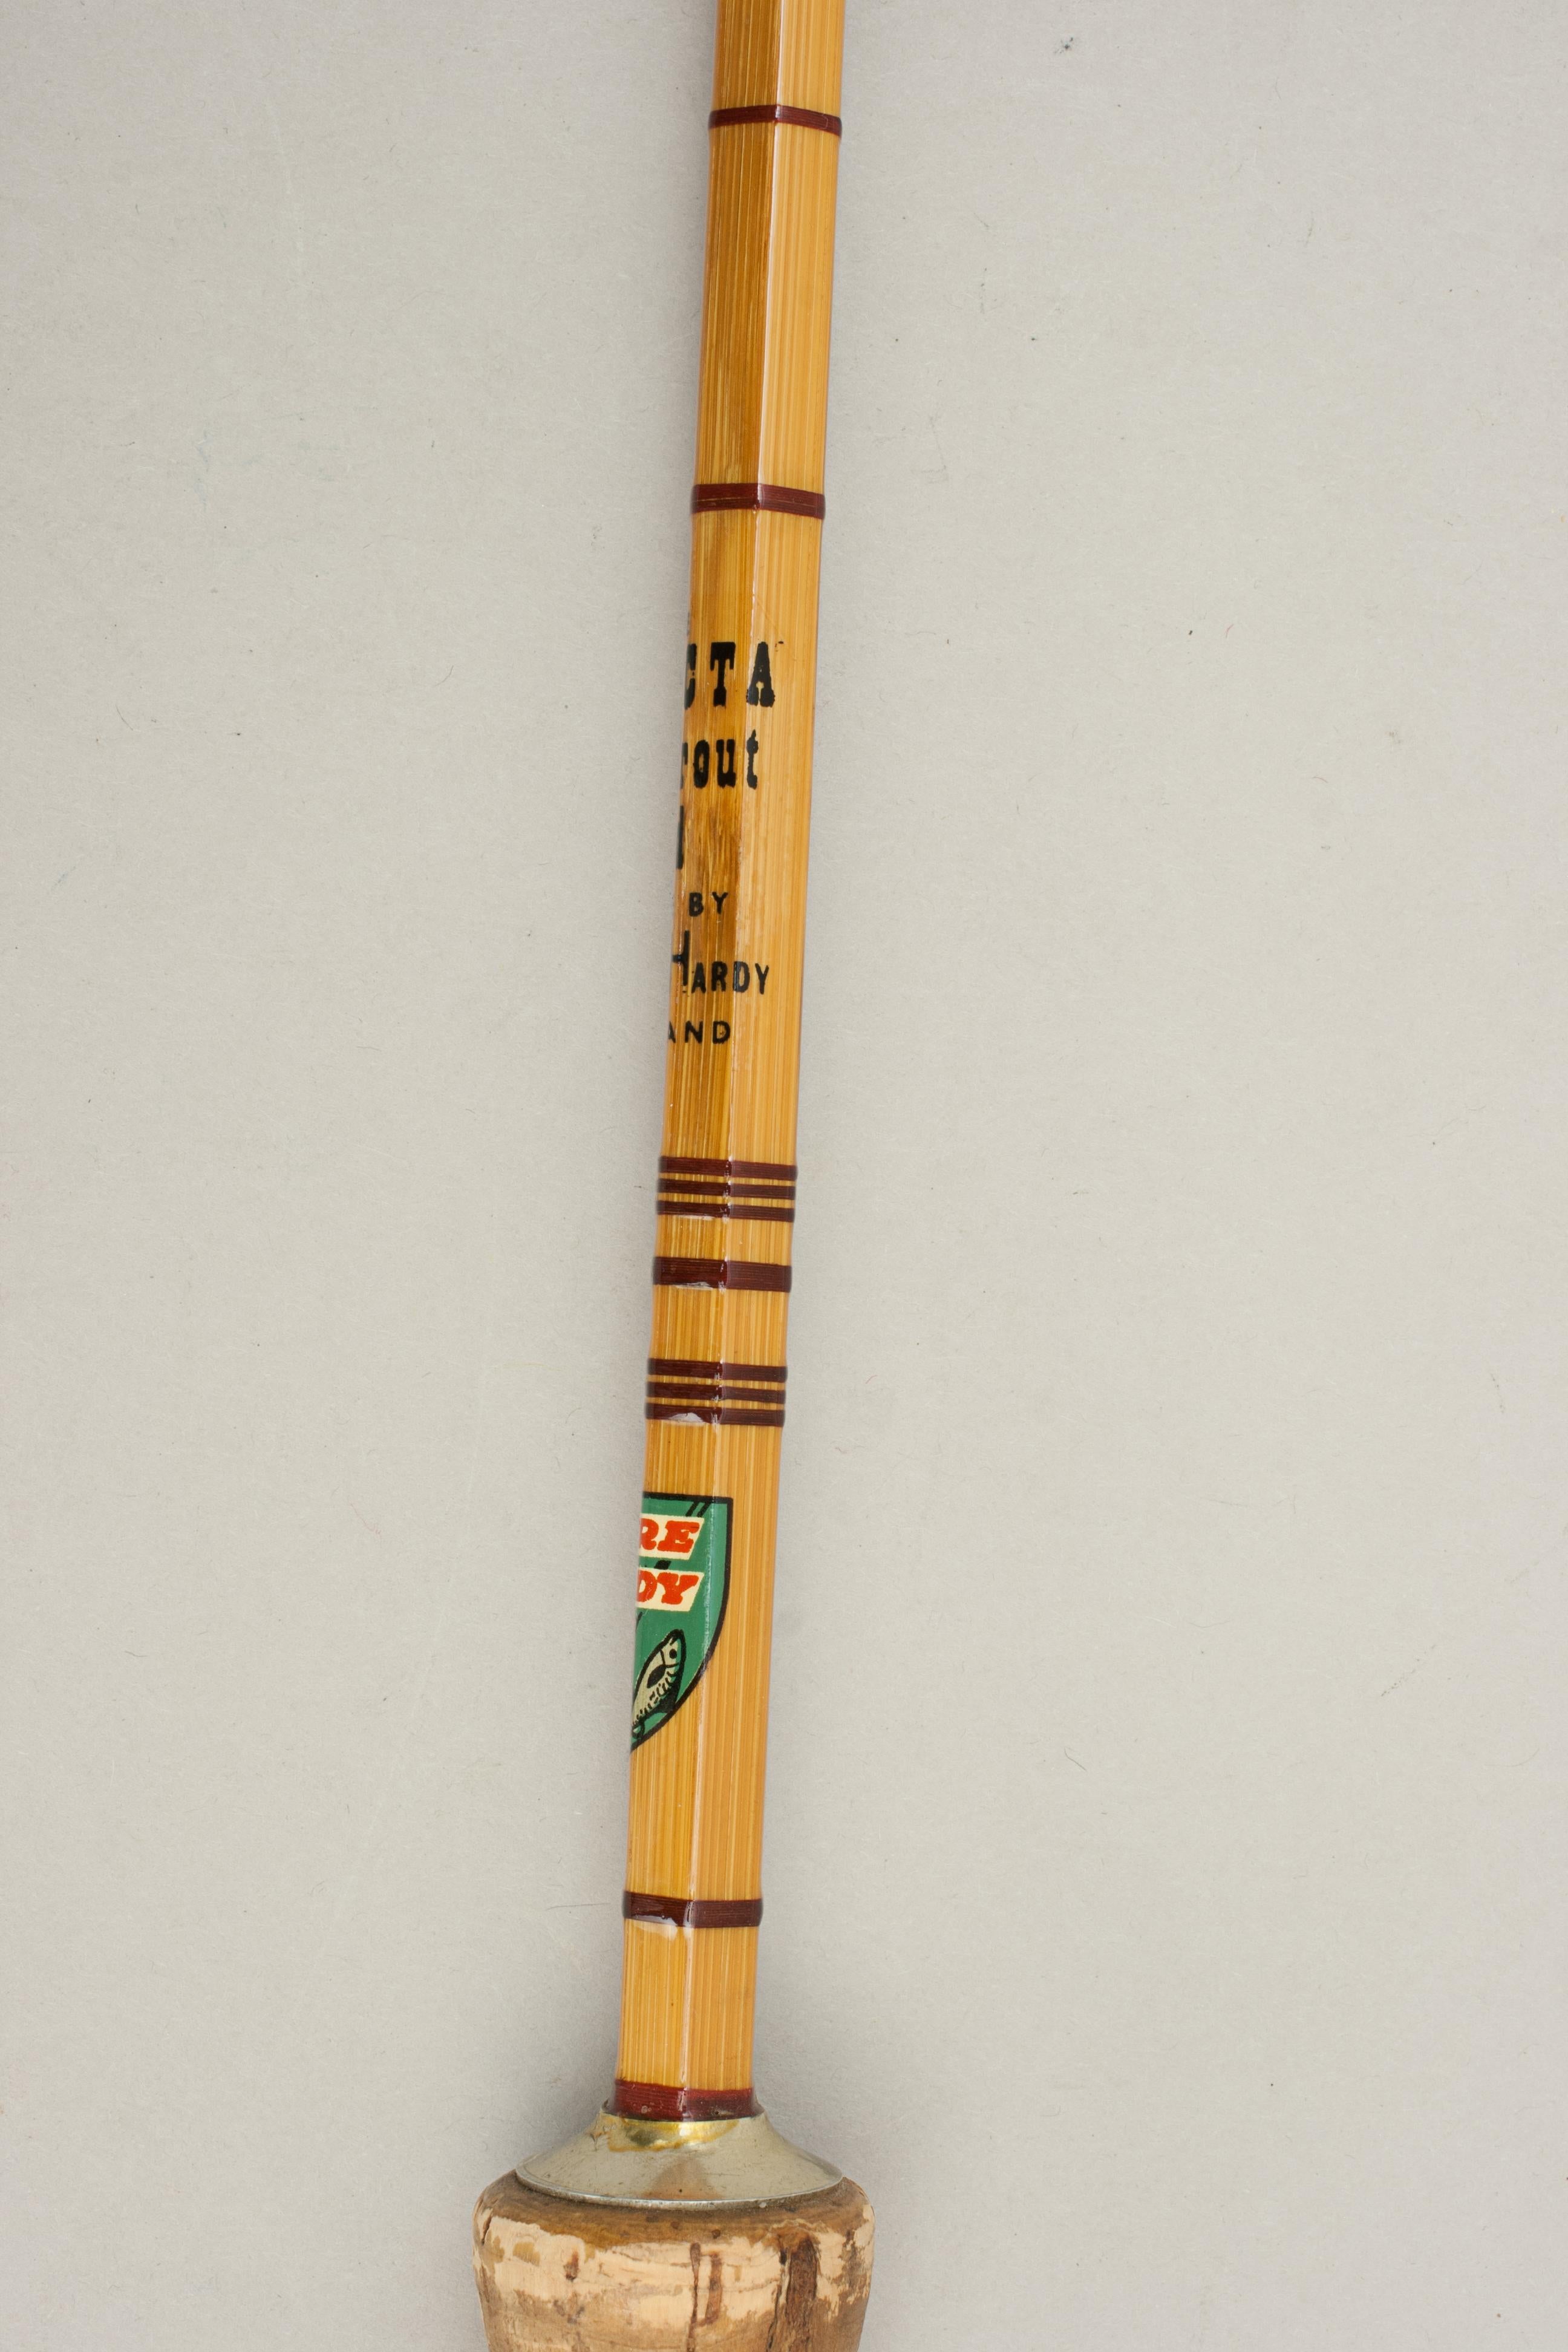 Vintage Hardy Fishing Rod, Mitre, Hardy, The Invicta Sea Trout Fly Fishing Rod 4